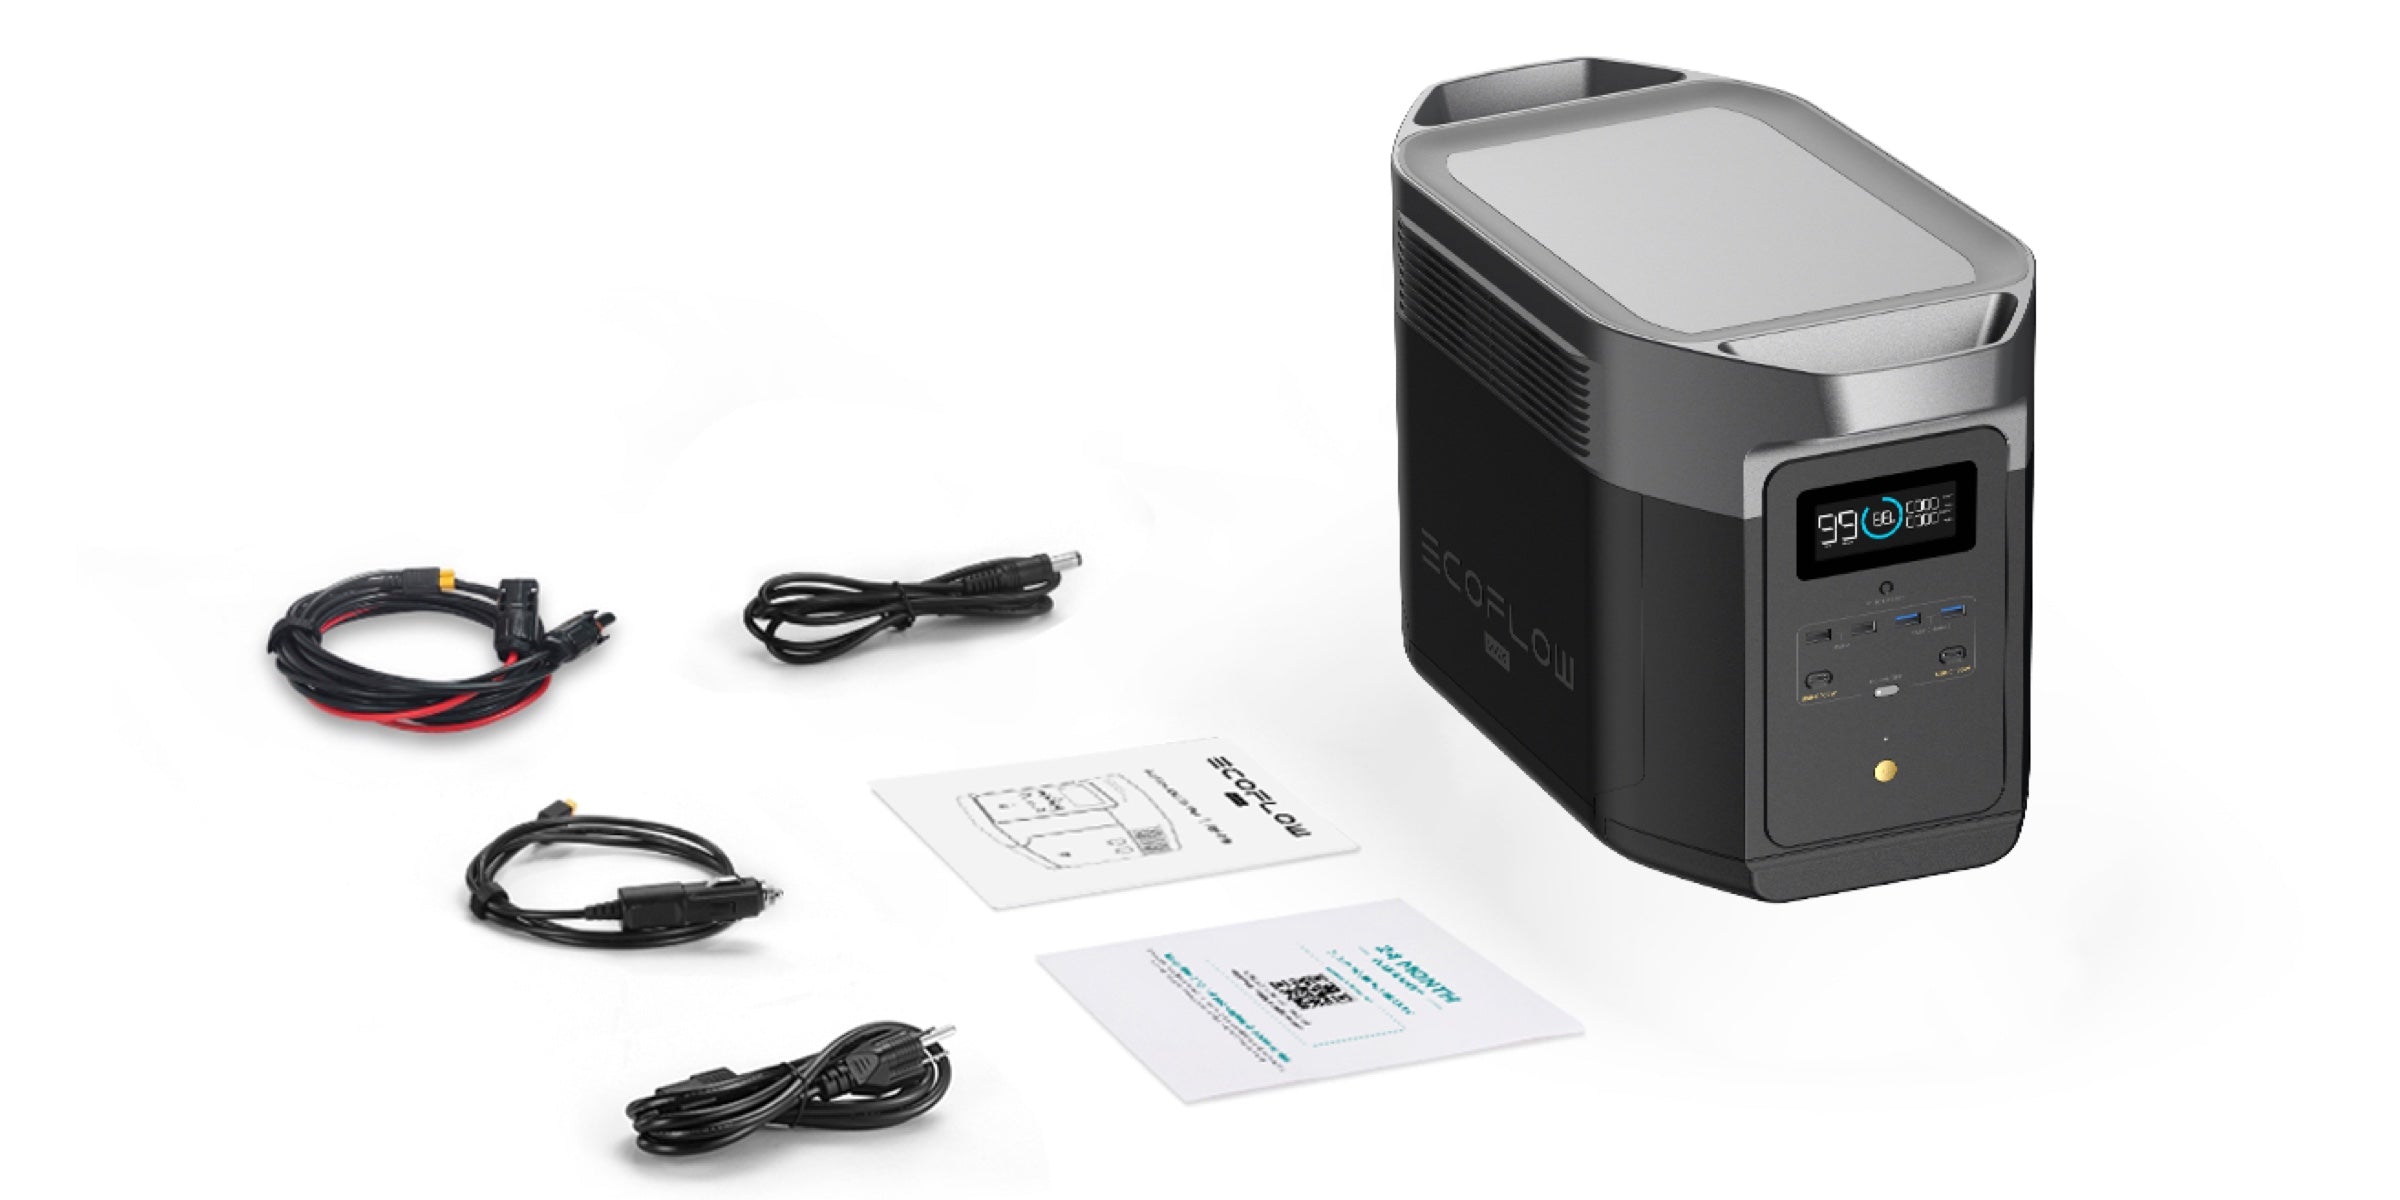 Ecoflow_Delta_Max_Mobile_Power_Station_2000W_1612Wh_sold_by_Technomobi_3